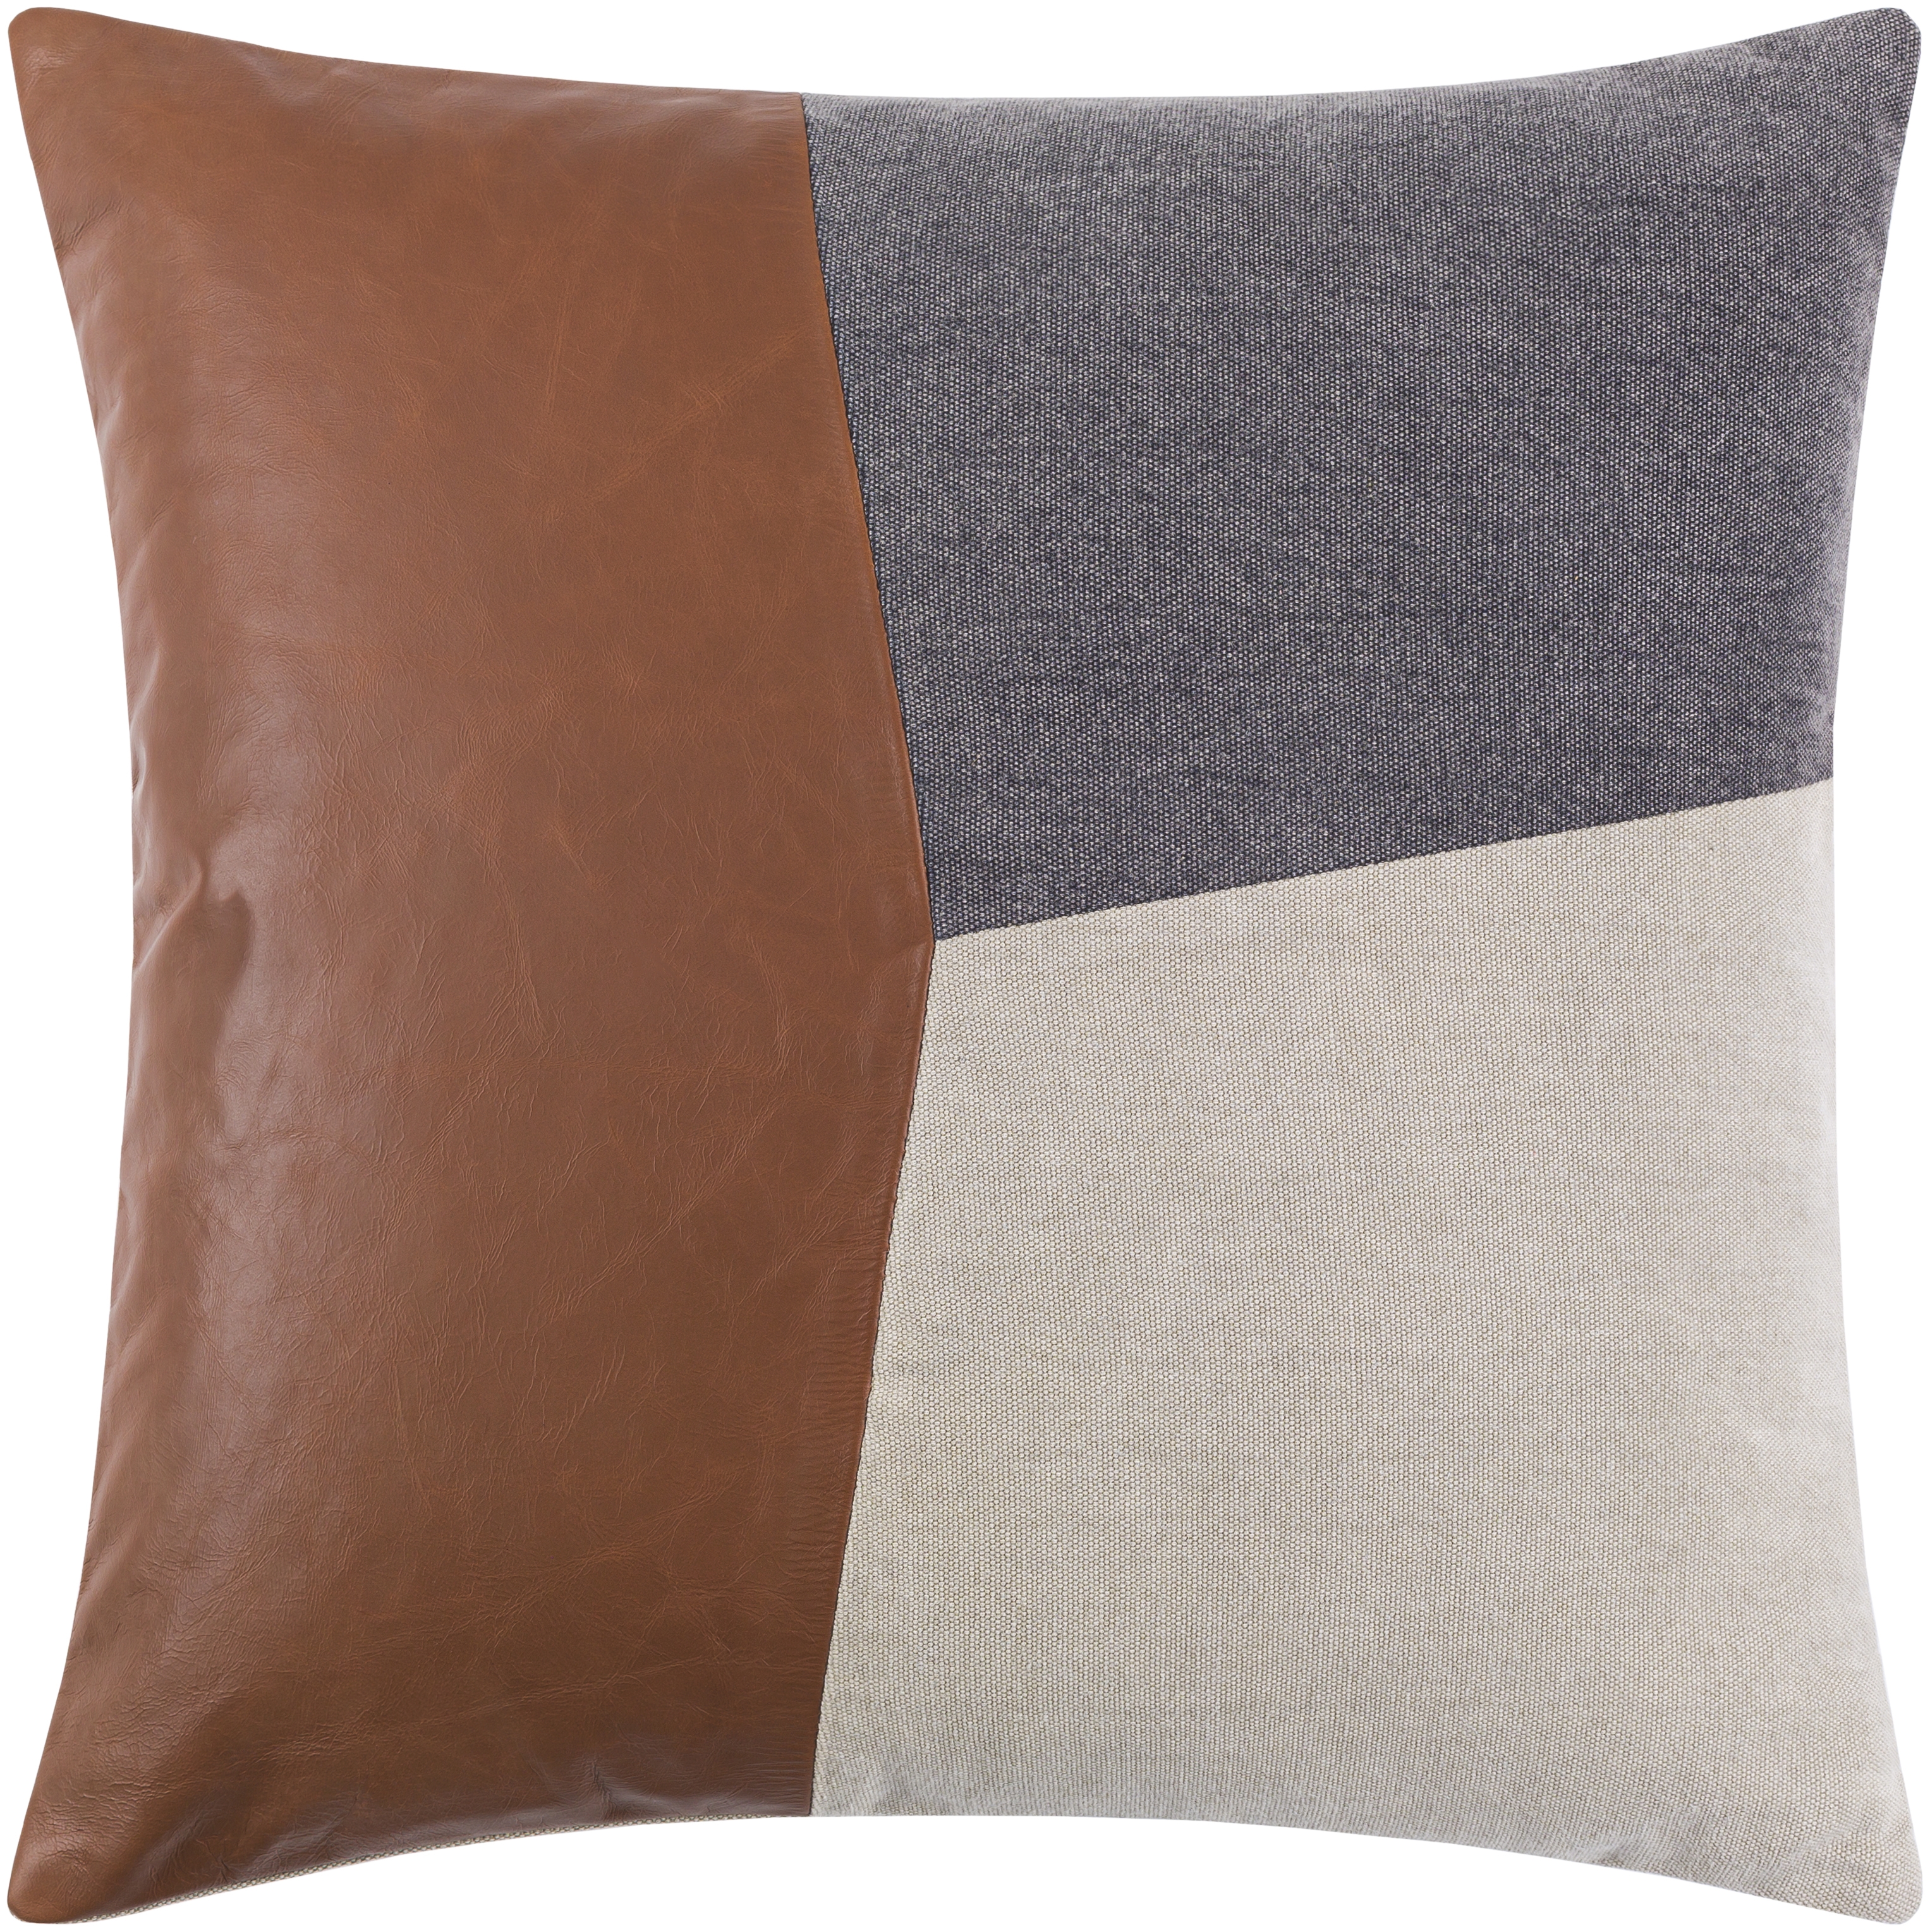 Branson Throw Pillow, 18" x 18", with down insert - Image 0